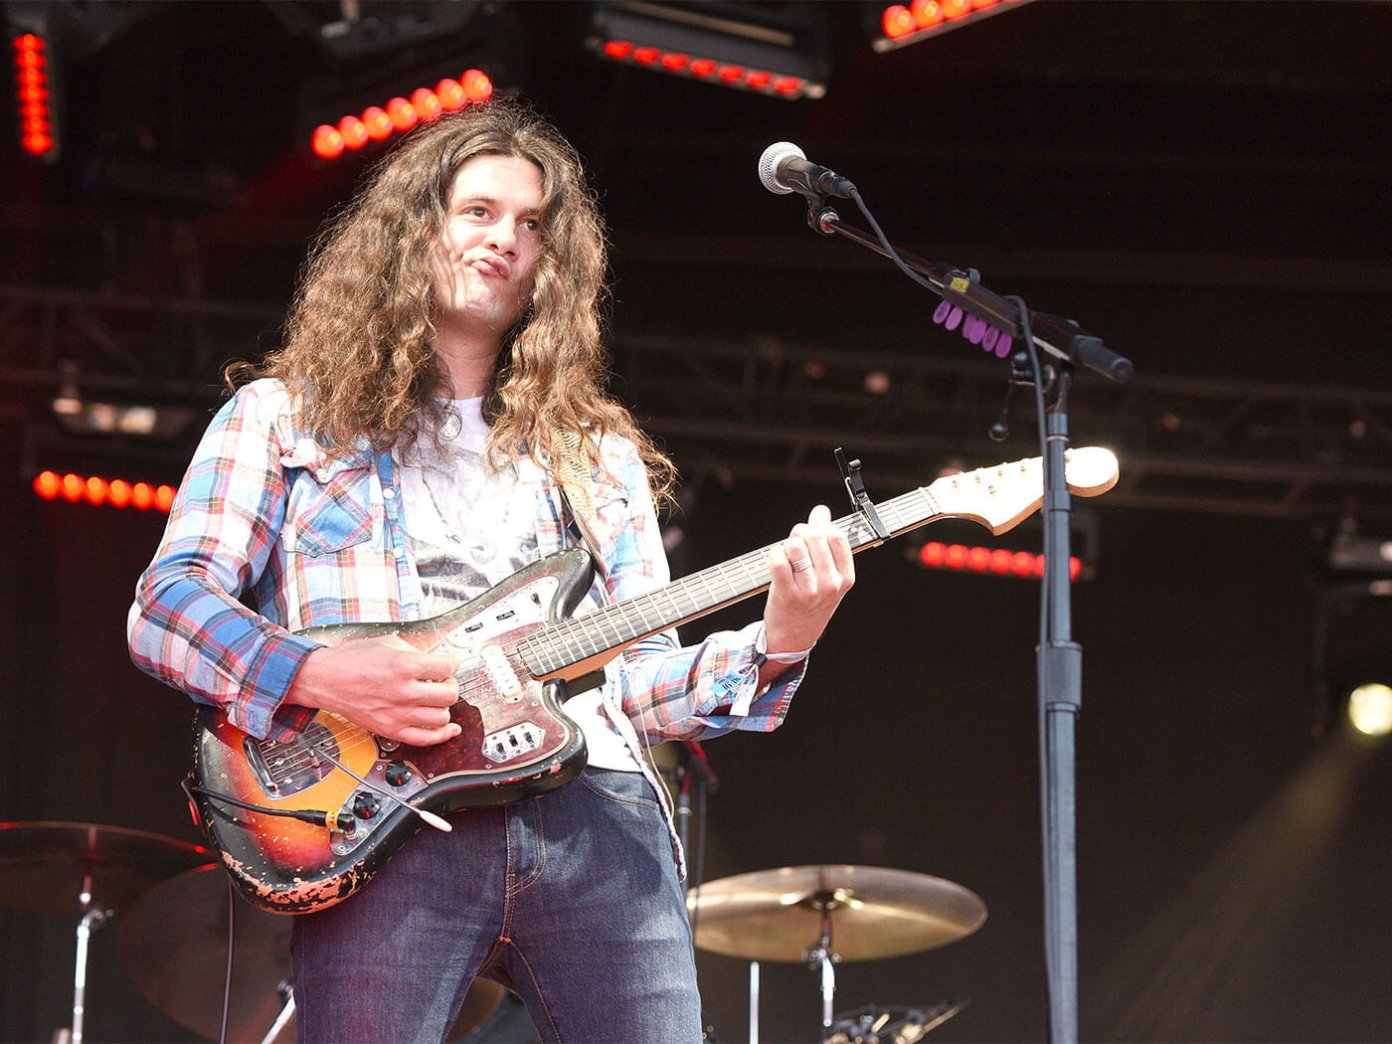 Kurt Vile to go on his first solo tour in over a decade